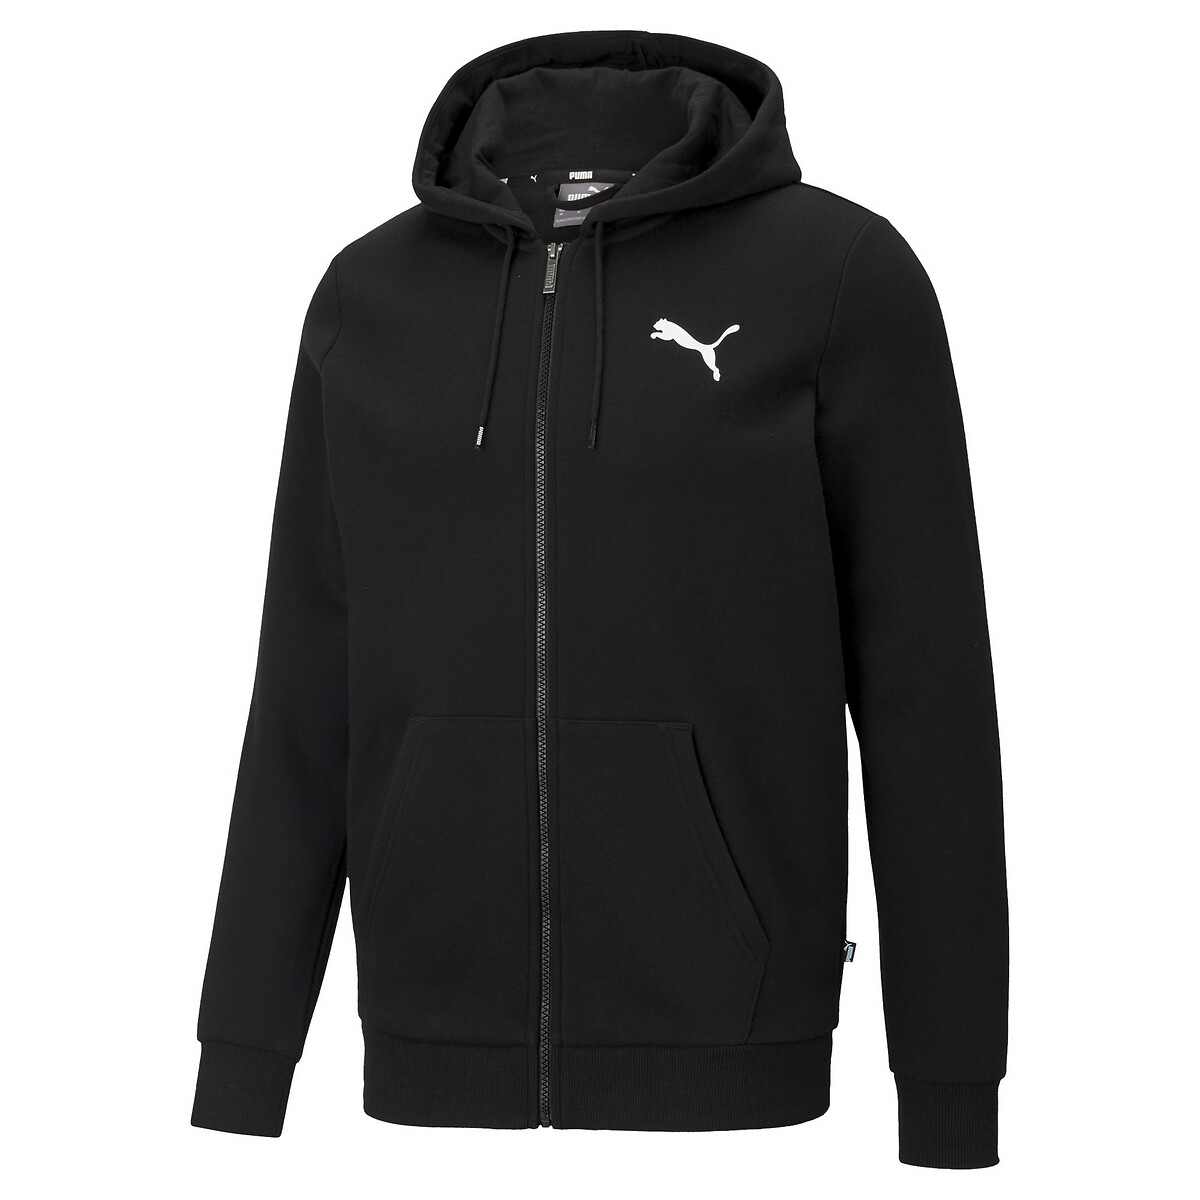 Essential cotton mix hoodie with small logo print and zip fastening ...